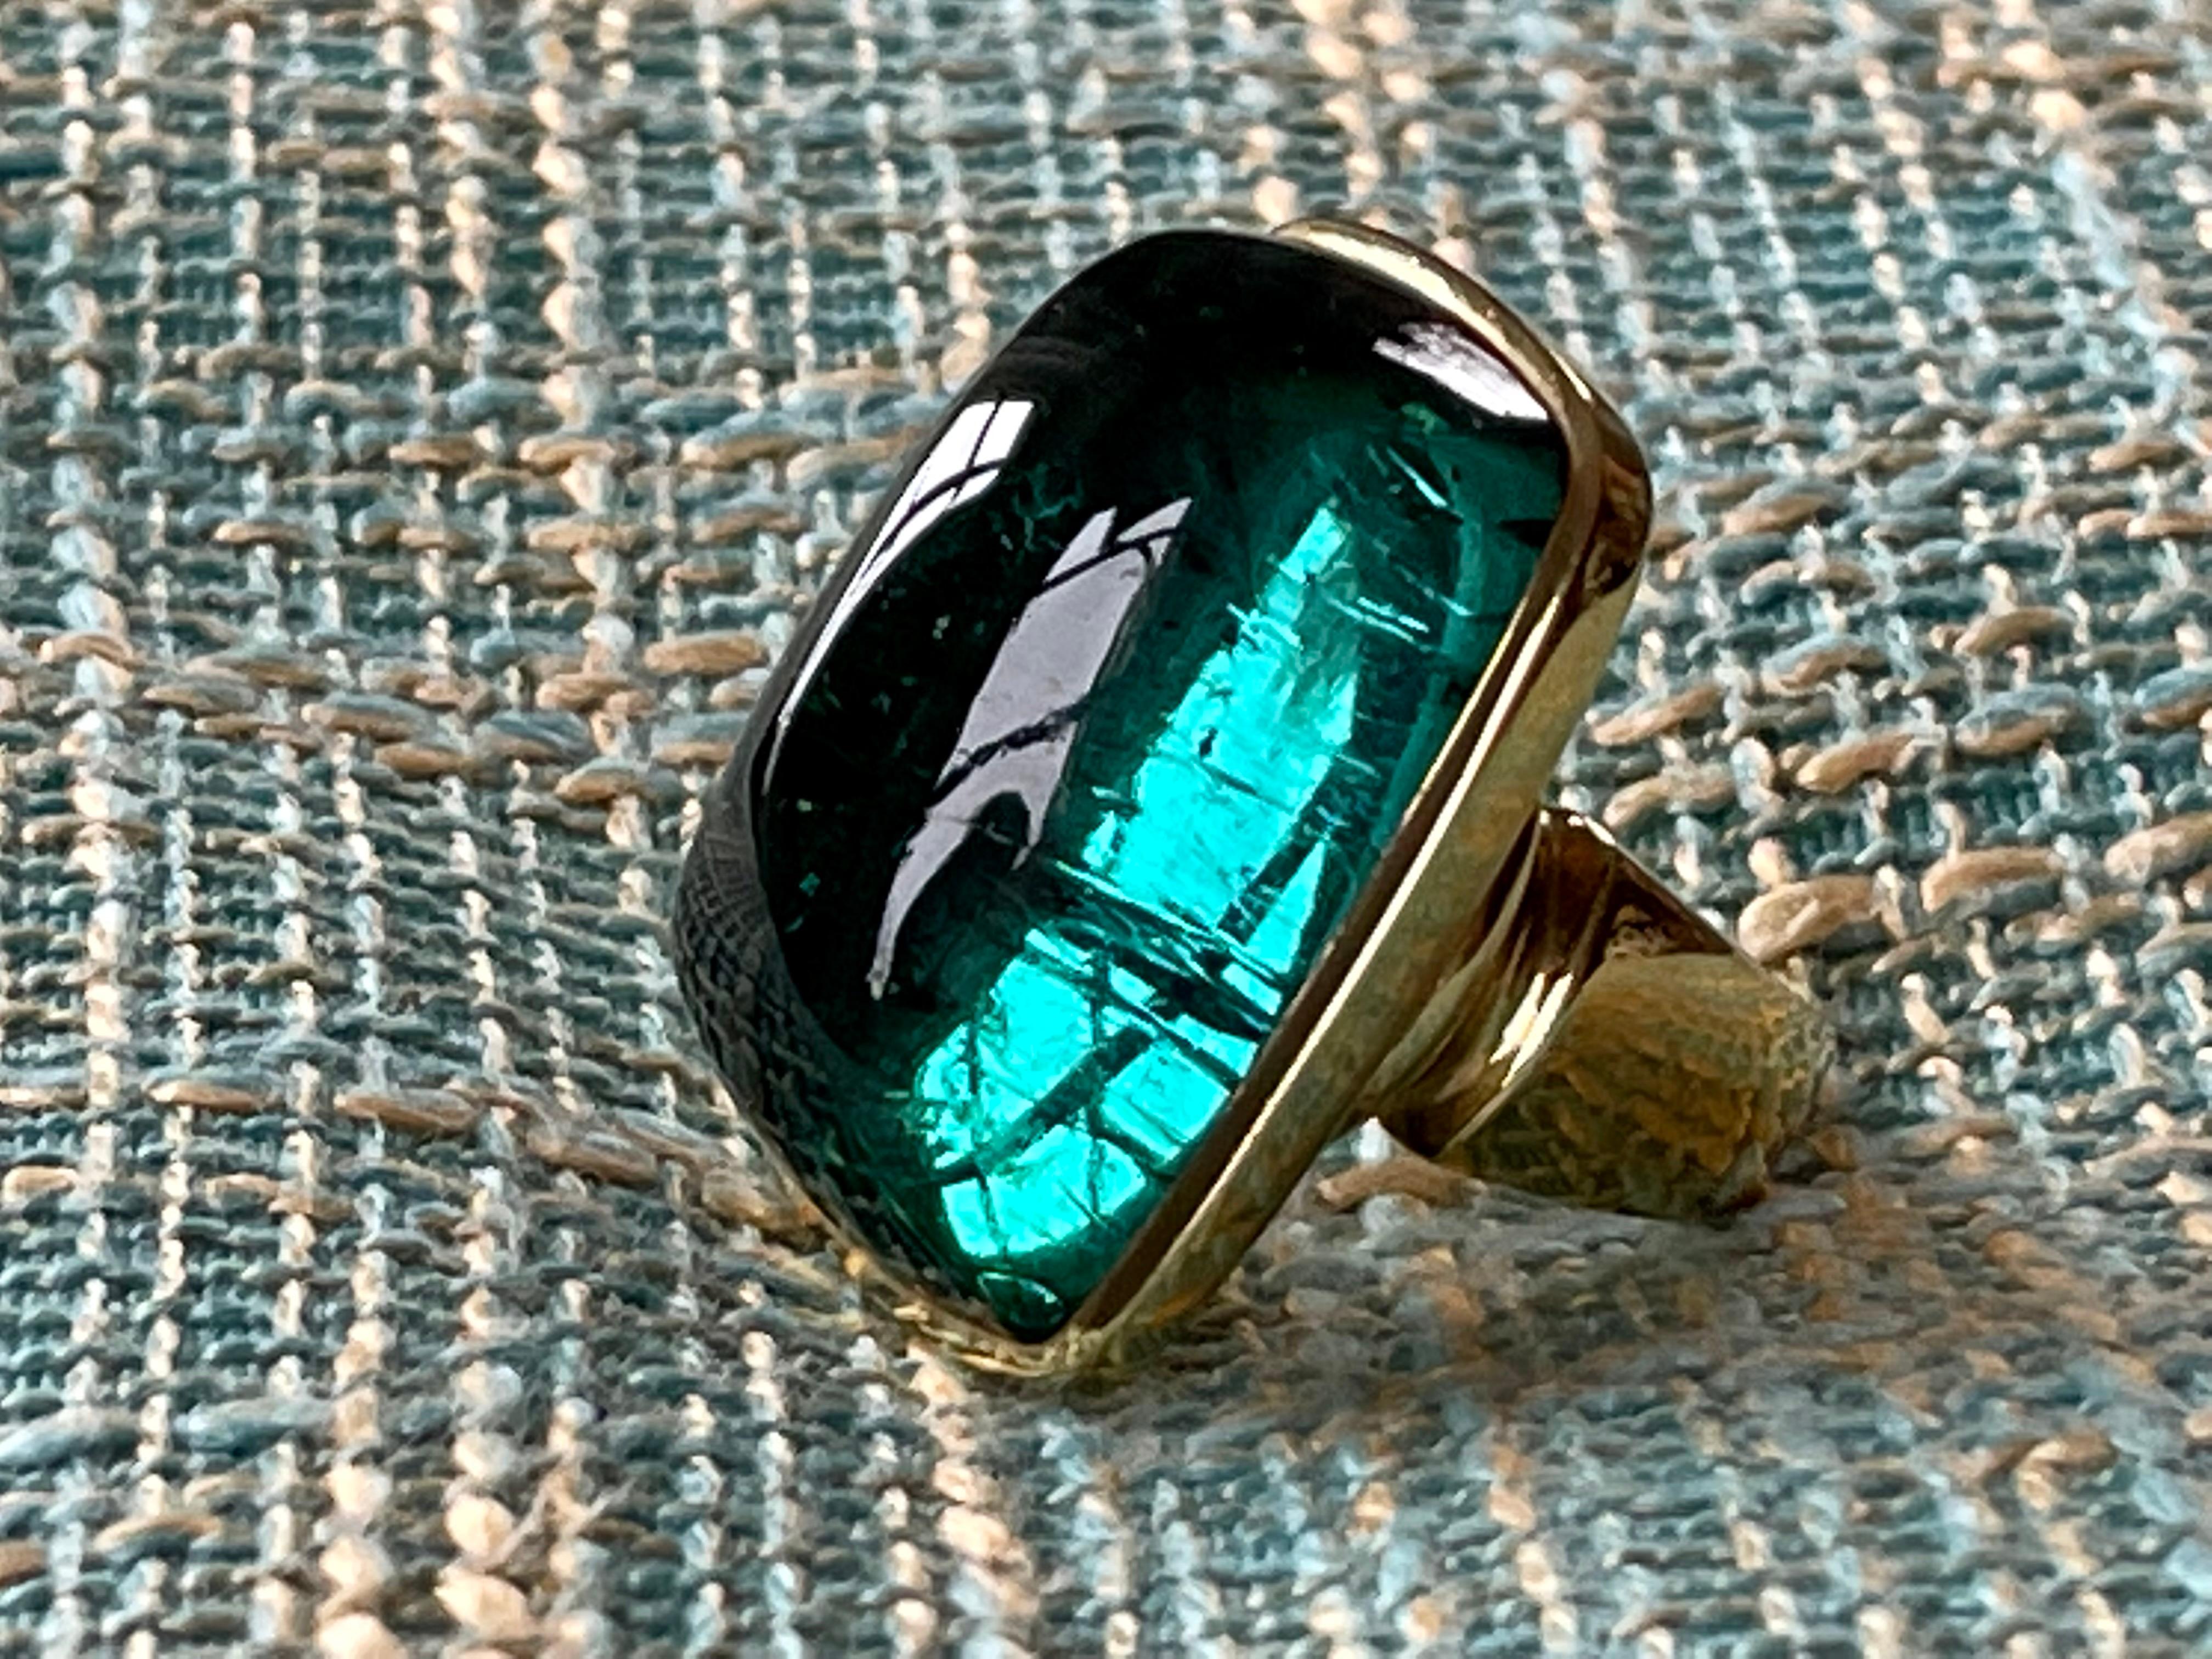 Stunning 18 K yellow Gold Ring featuring a huge bezel set fascintaing green Tourmaline Cabochon. Started in 1967 in London by Leo and Ginnie de Vroomen the company is known for bold and innovative designs. Distinctive from the start, the renowned